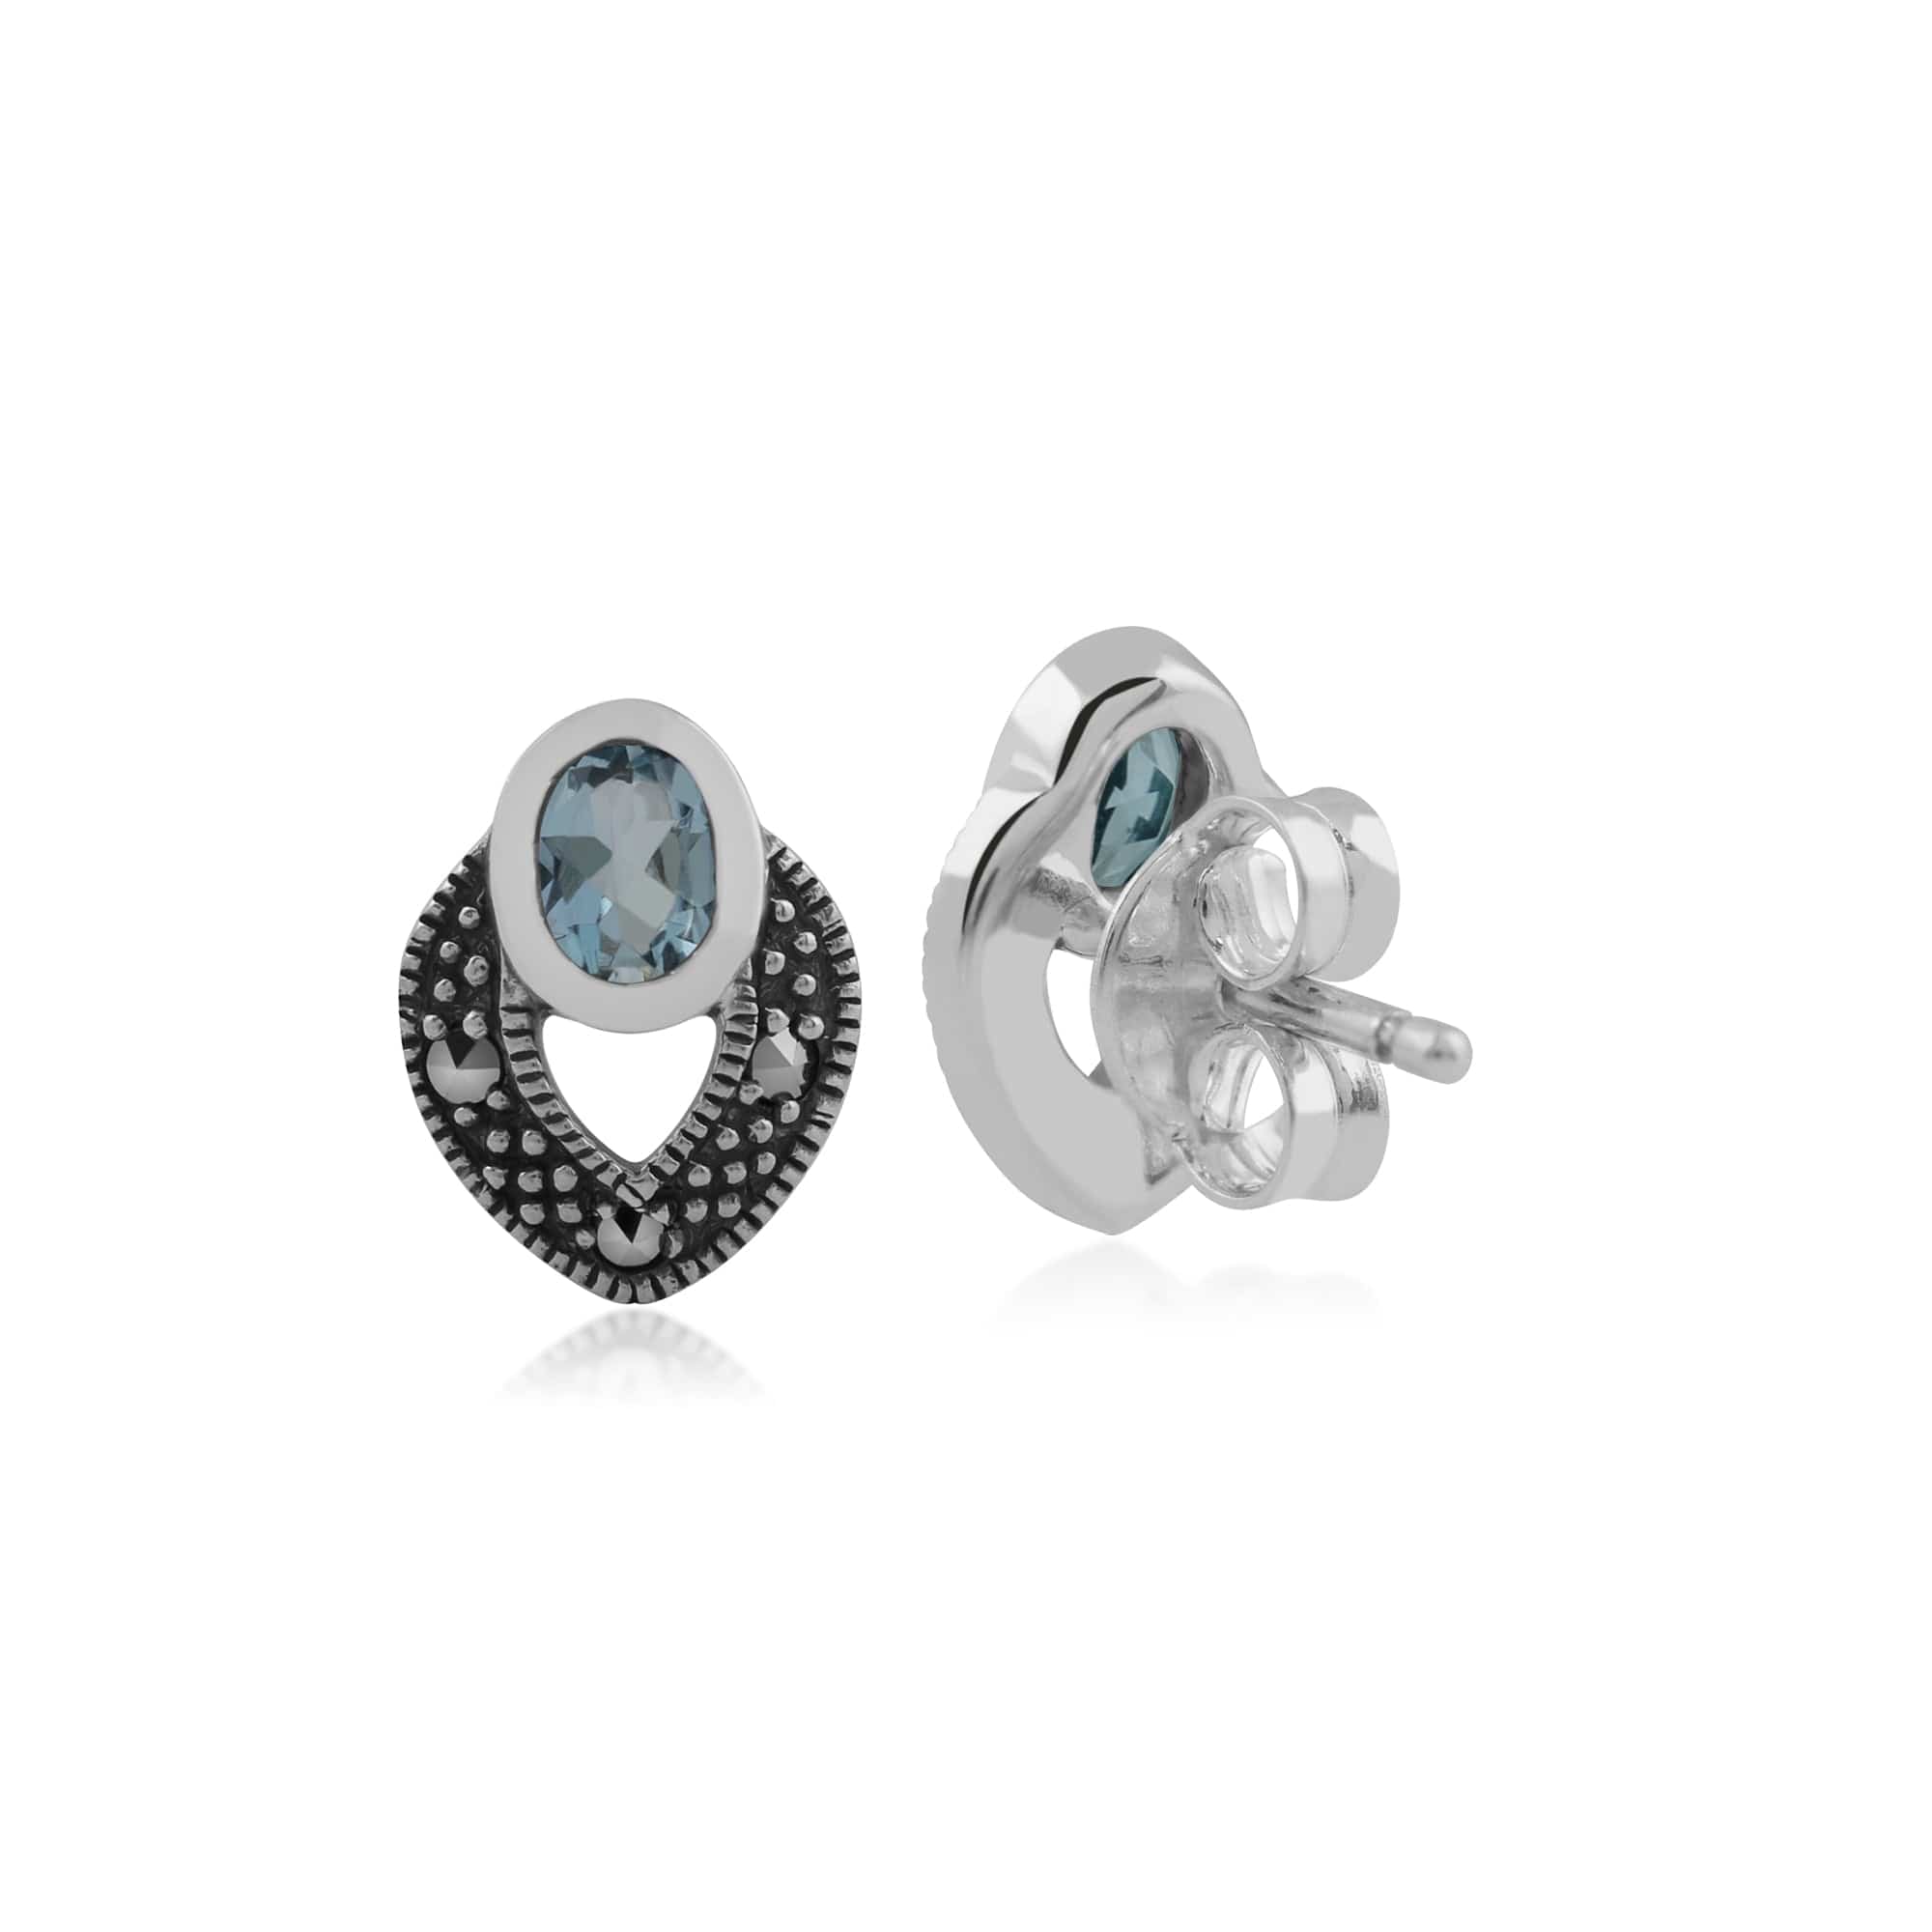 214E717804925 Art Deco Style Oval Aquamarine & Marcasite Stud Earrings in 925 Sterling Silver 2